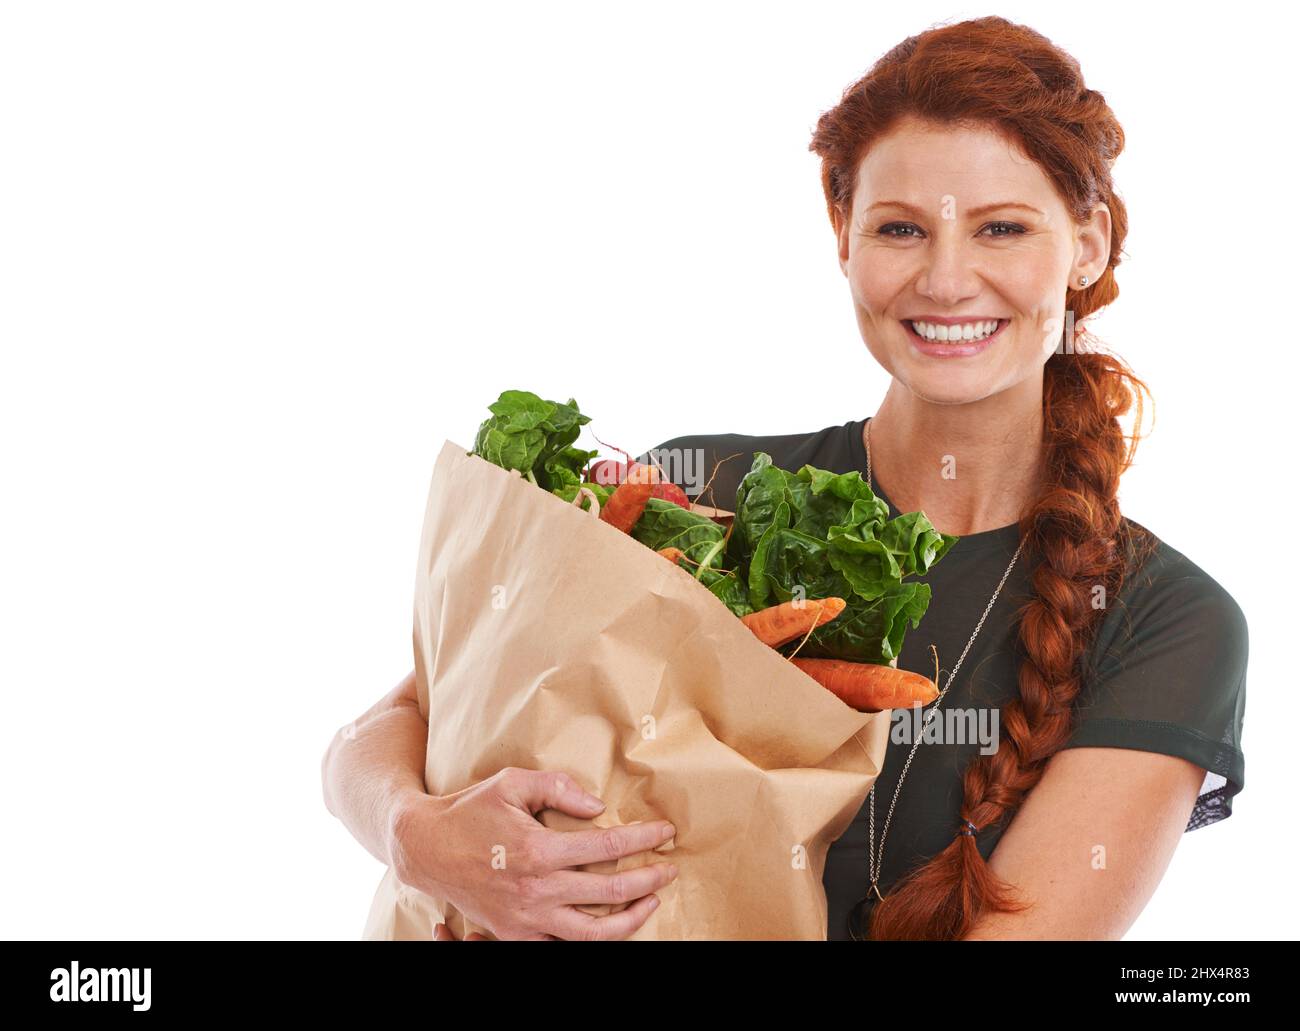 She makes healthy eating a priority. Studio shot of a beautiful young woman holding a shopping bag full of fresh vegetables. Stock Photo